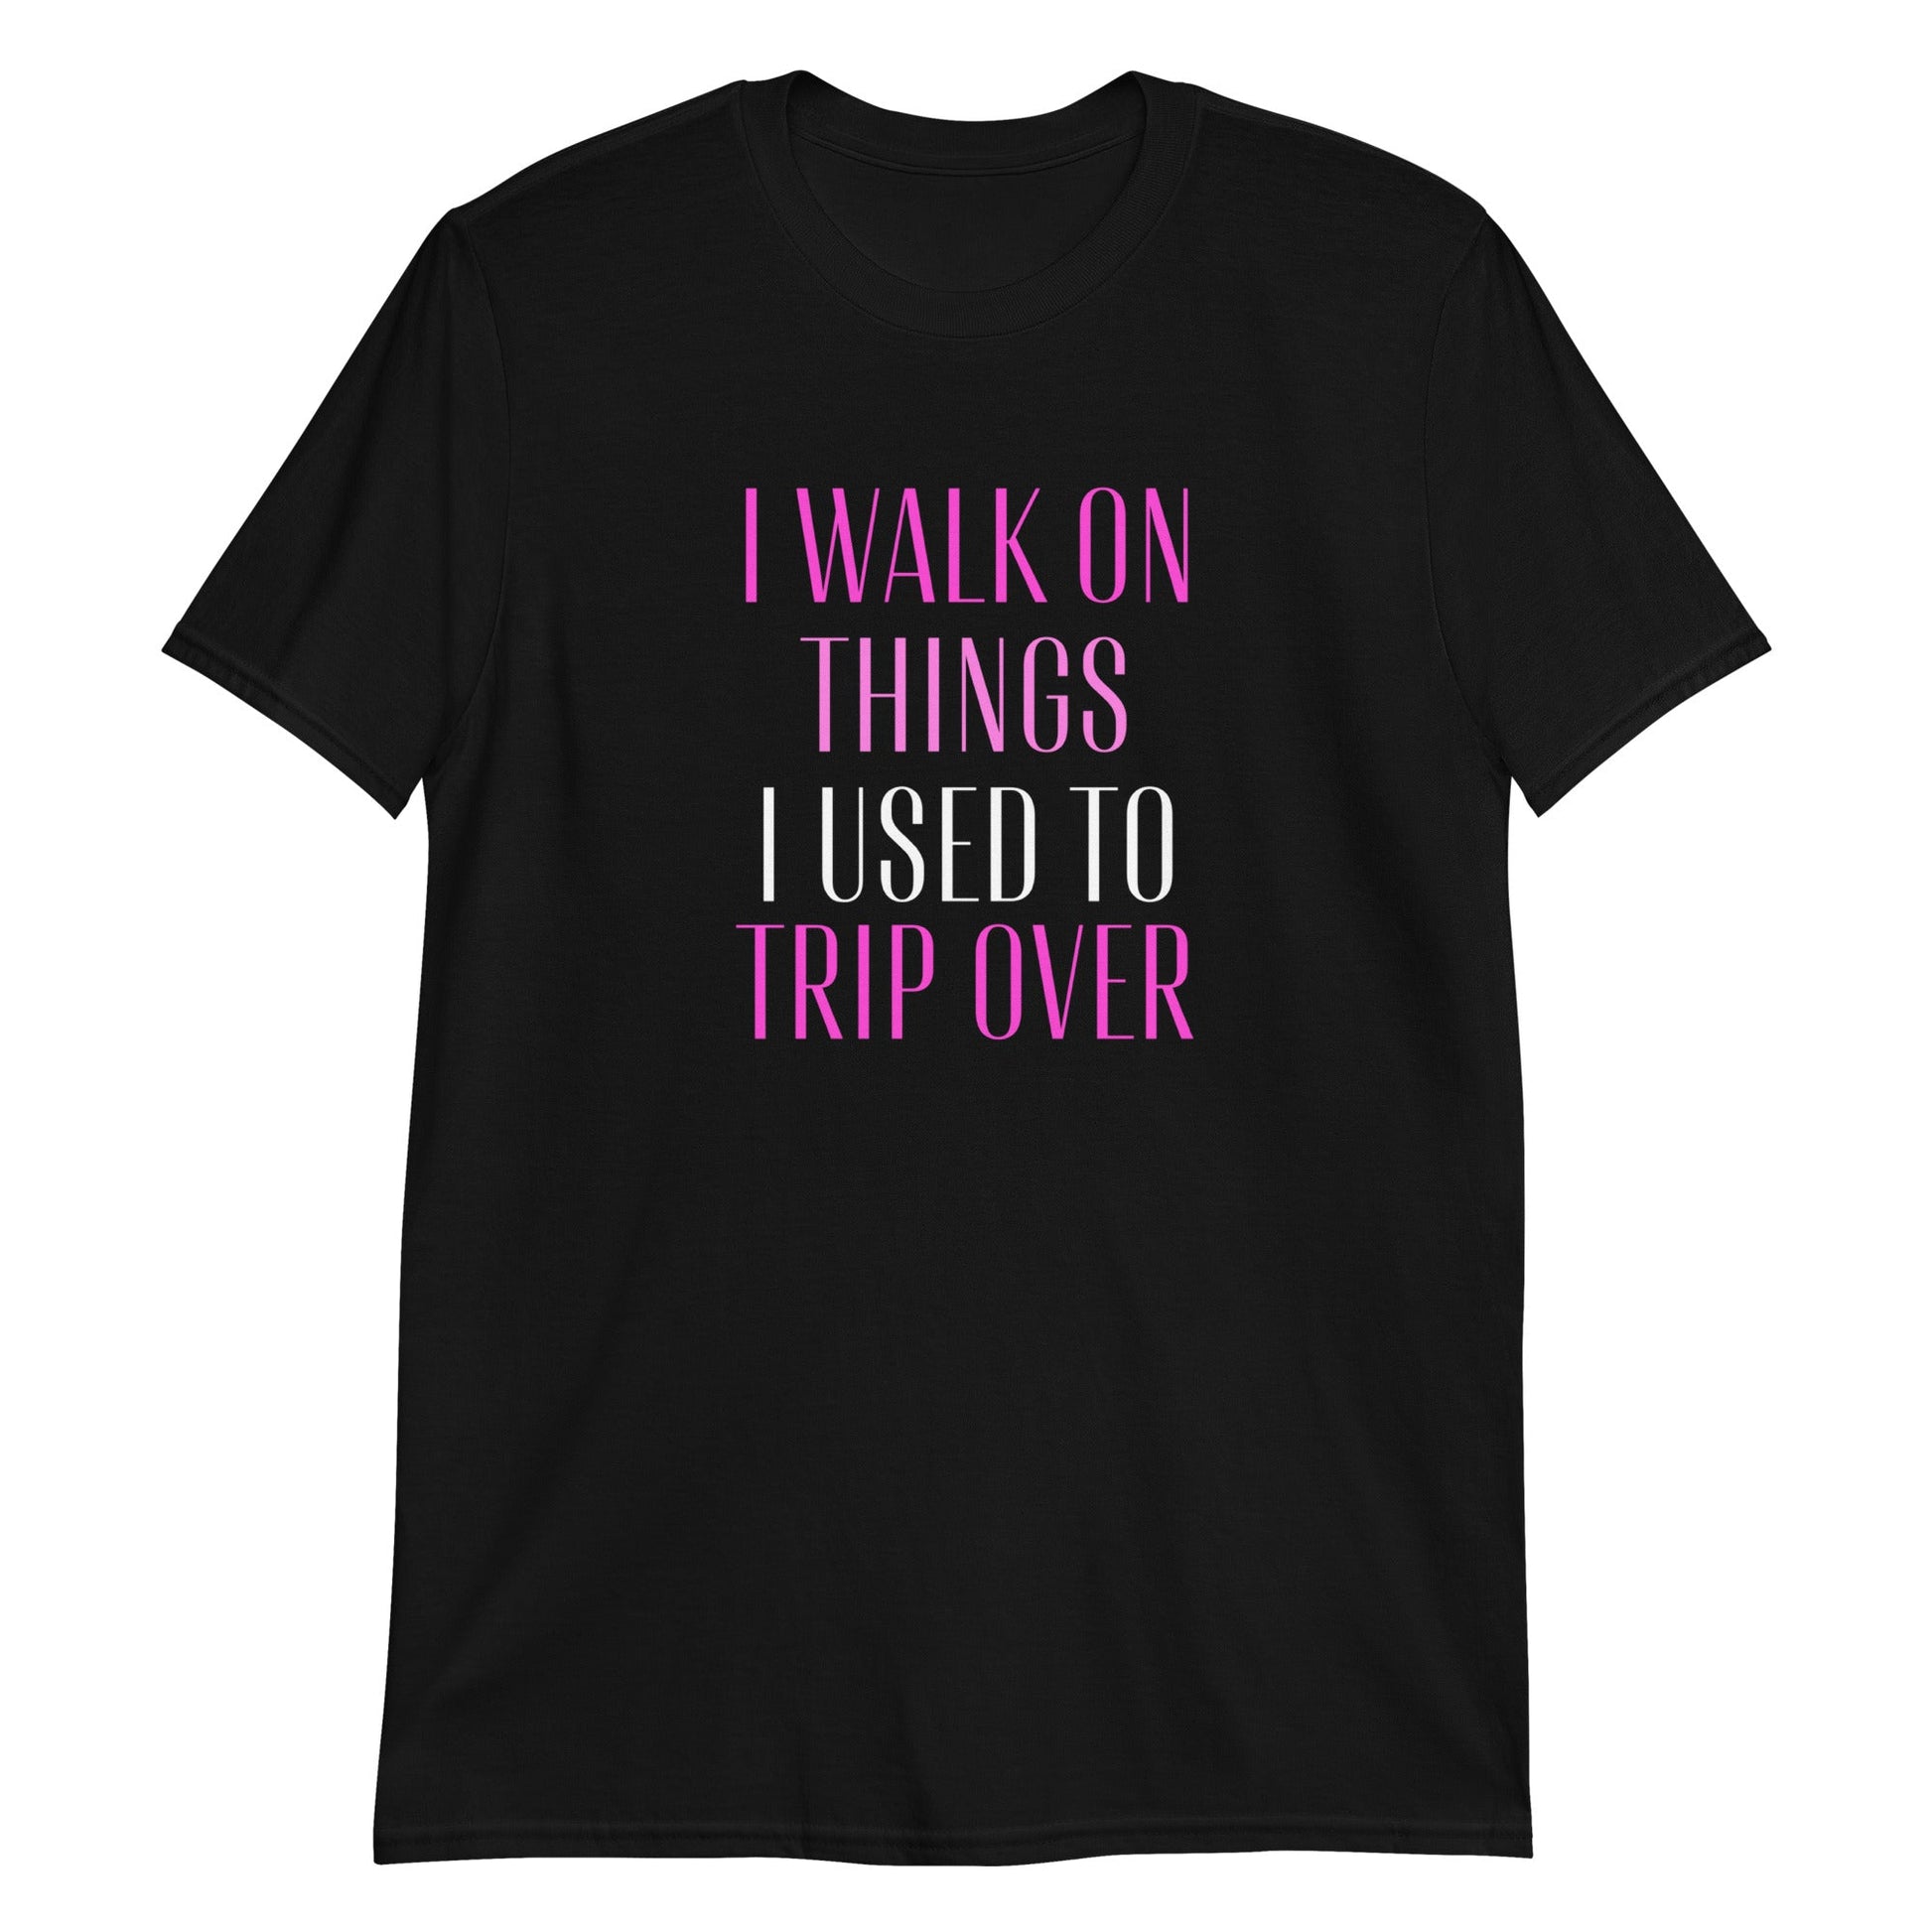 I Walk On Things I Used To Trip Over Short Sleeve Unisex T-Shirt (For a Slim Fit Order a Size Down) - Catch This Tea Shirts